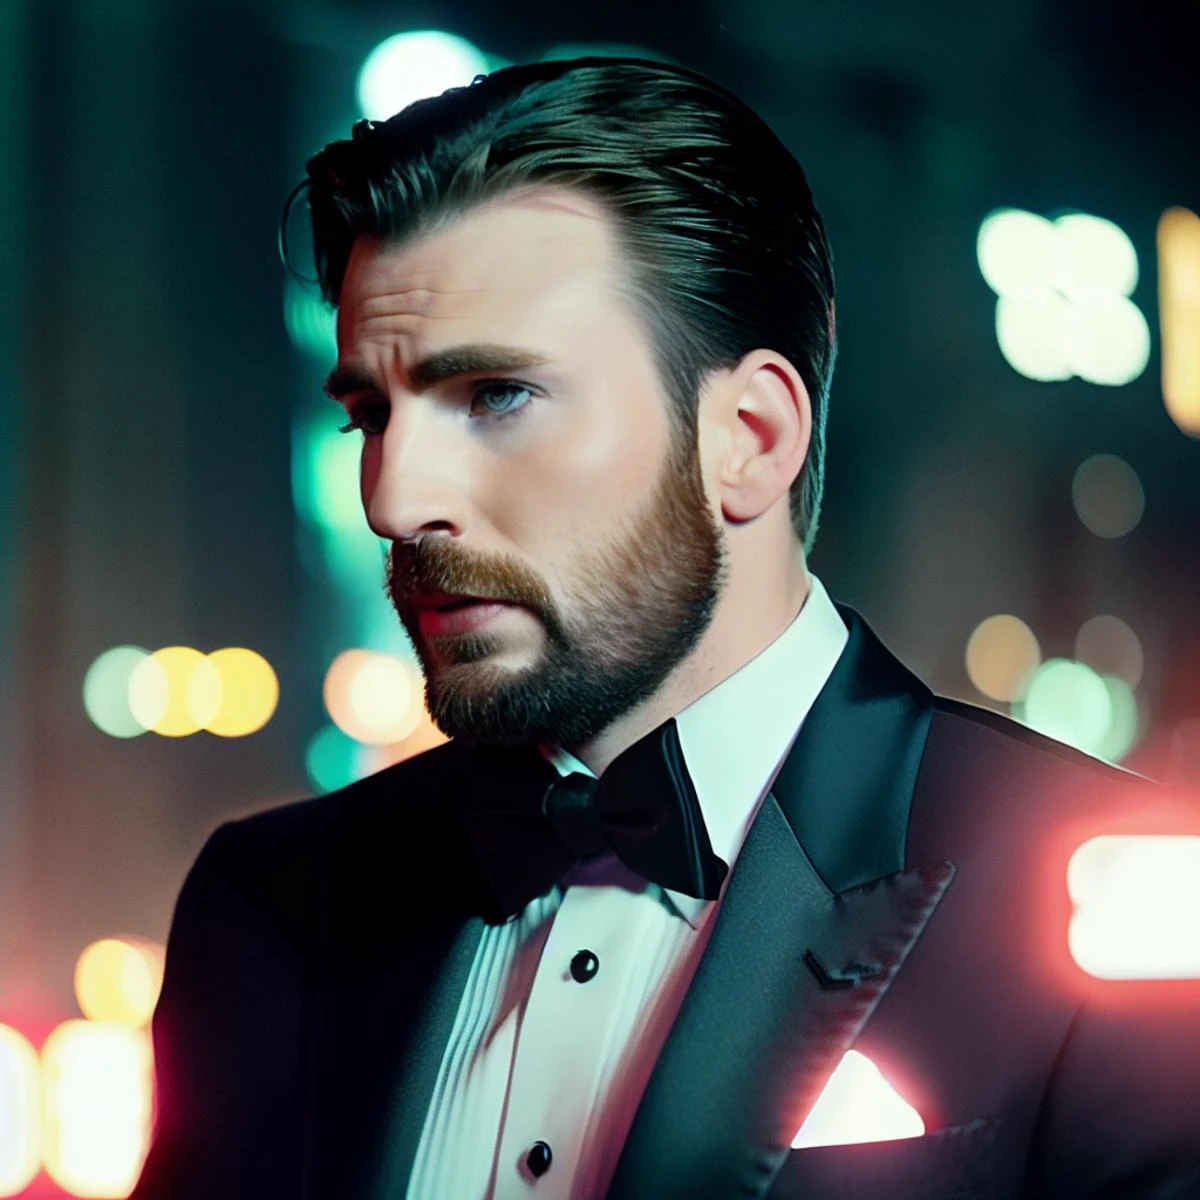 RAW full body portrait of chrisevans person wearing a tuxedo, professional photography, in blade runner, high resolution, 4k, 50mm, vaporwave, photo by Brooke Shaden, 